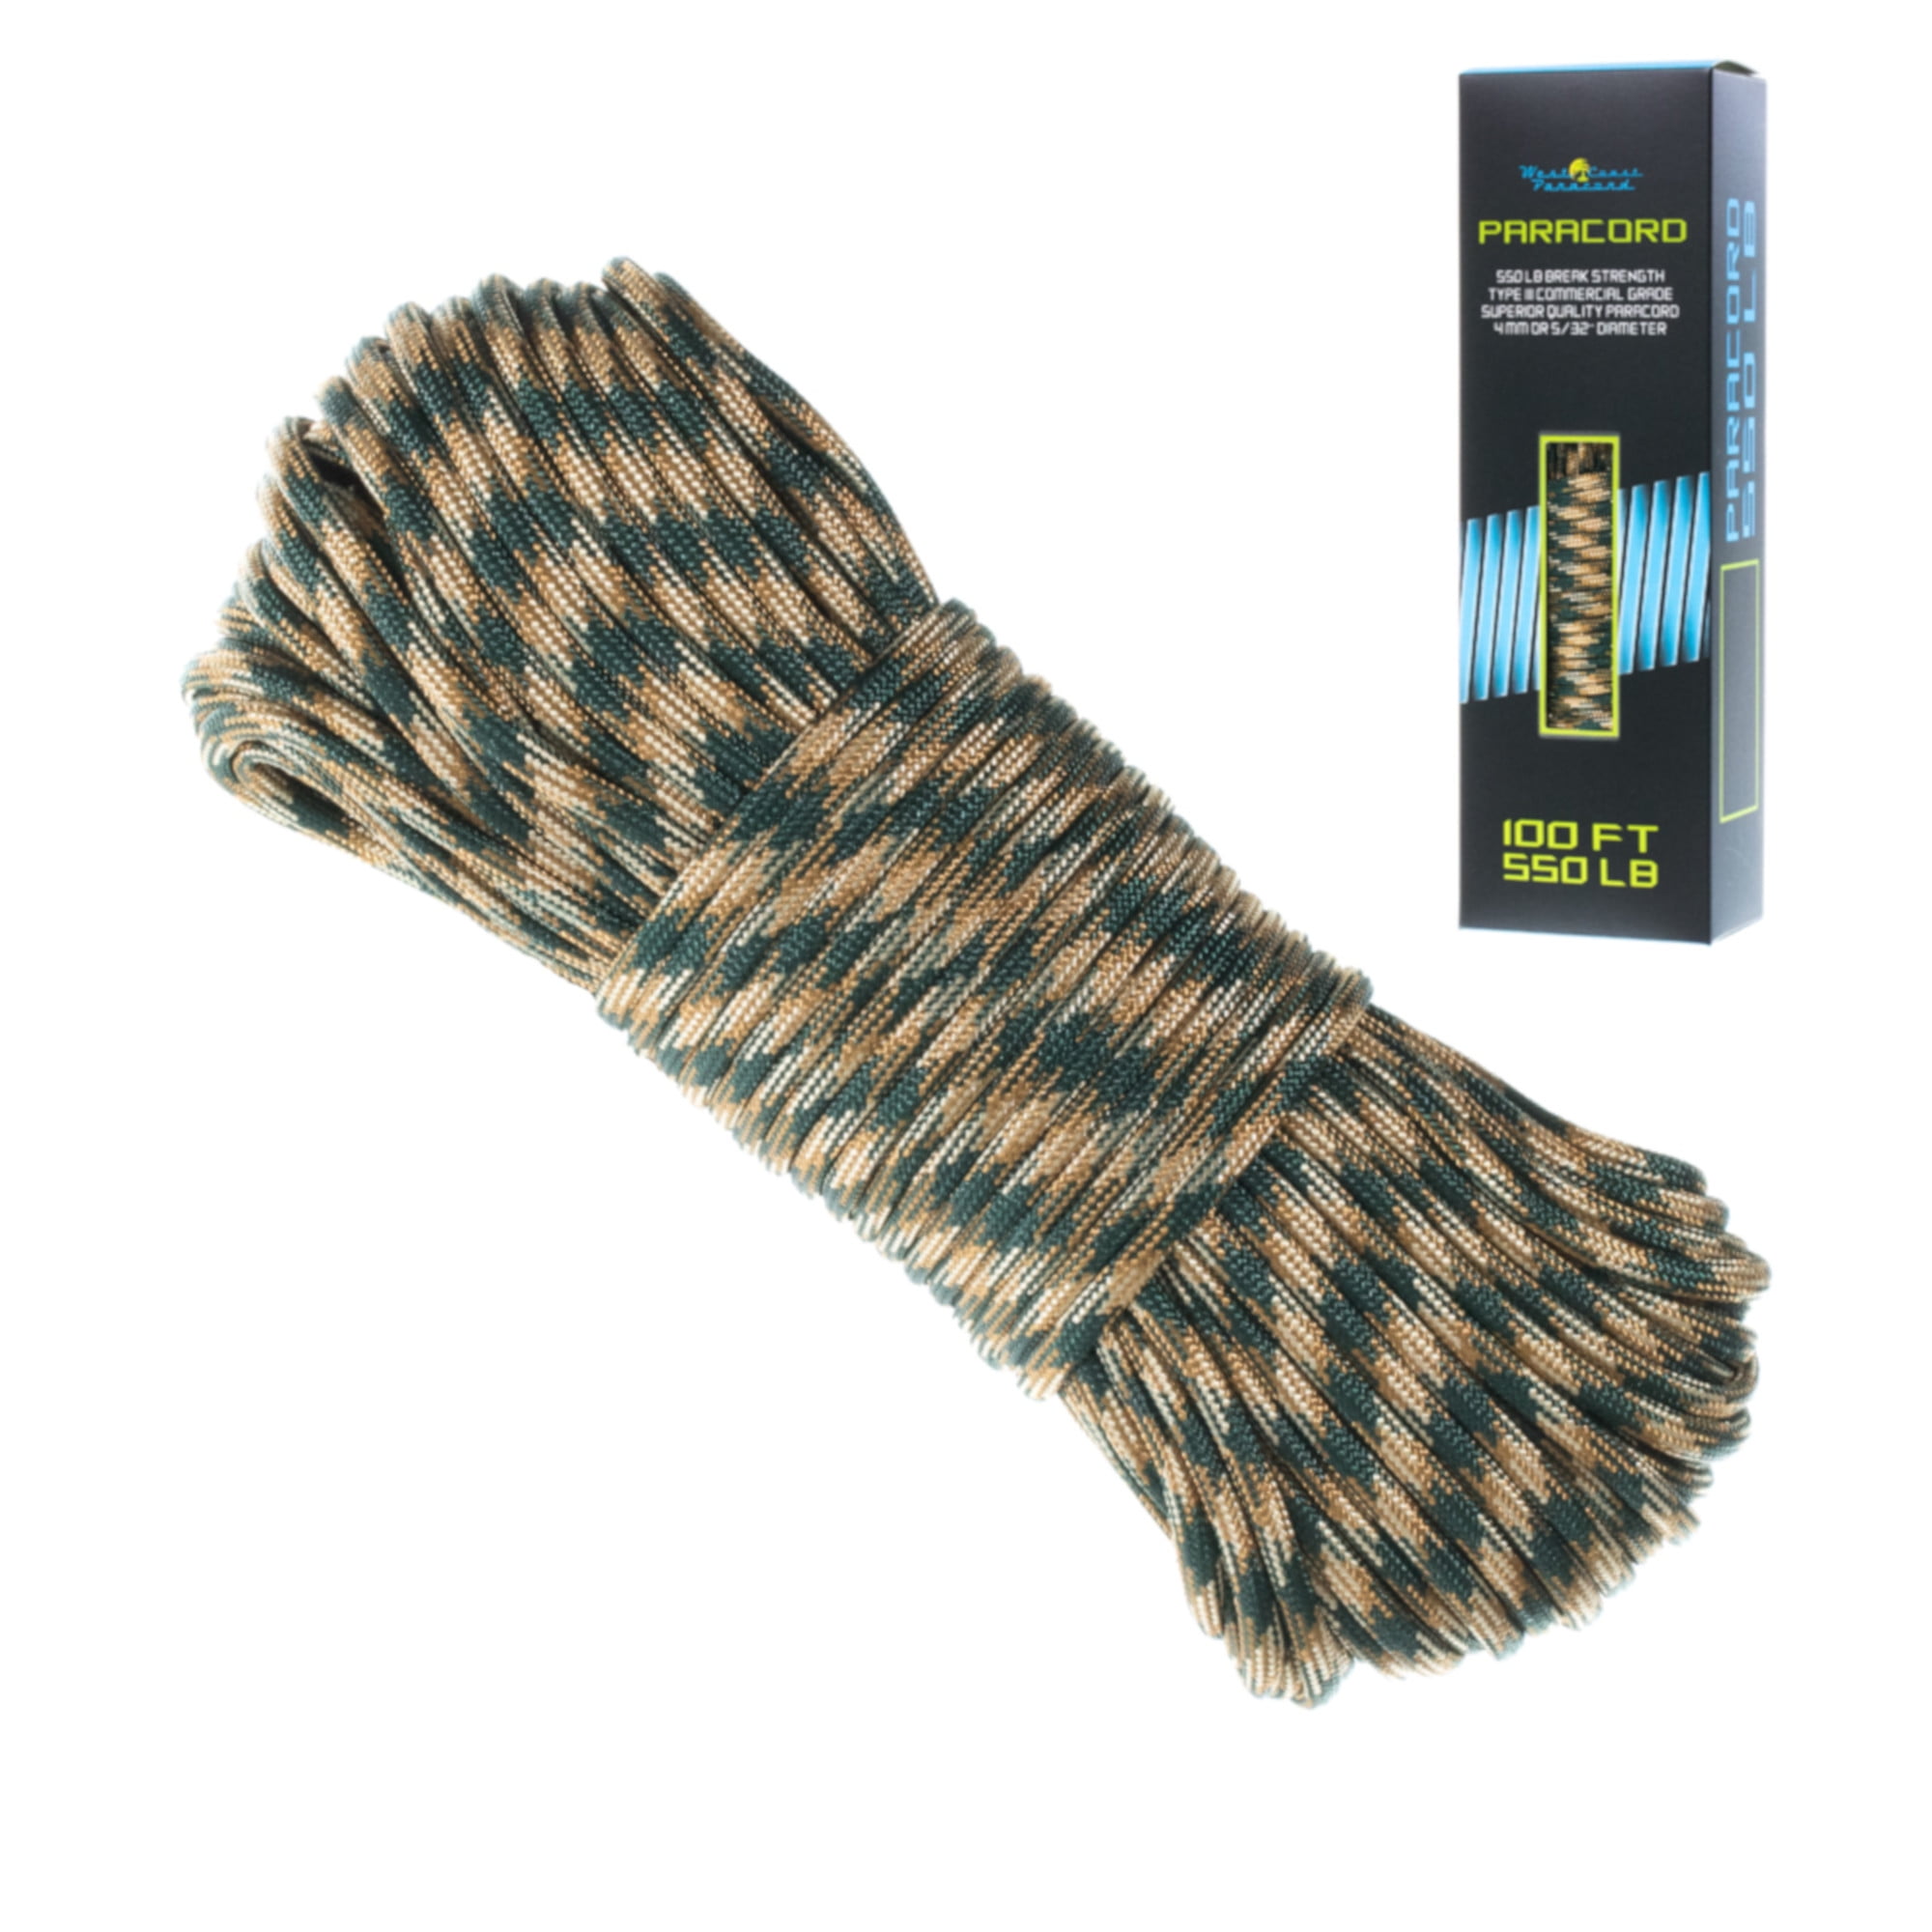 West Coast Paracord 550 Paracord - Type III Parachute Cord - 100 Foot Hanks  - Multiple Colors - Perfect for Crafting, Bracelets, Survival & Camping 